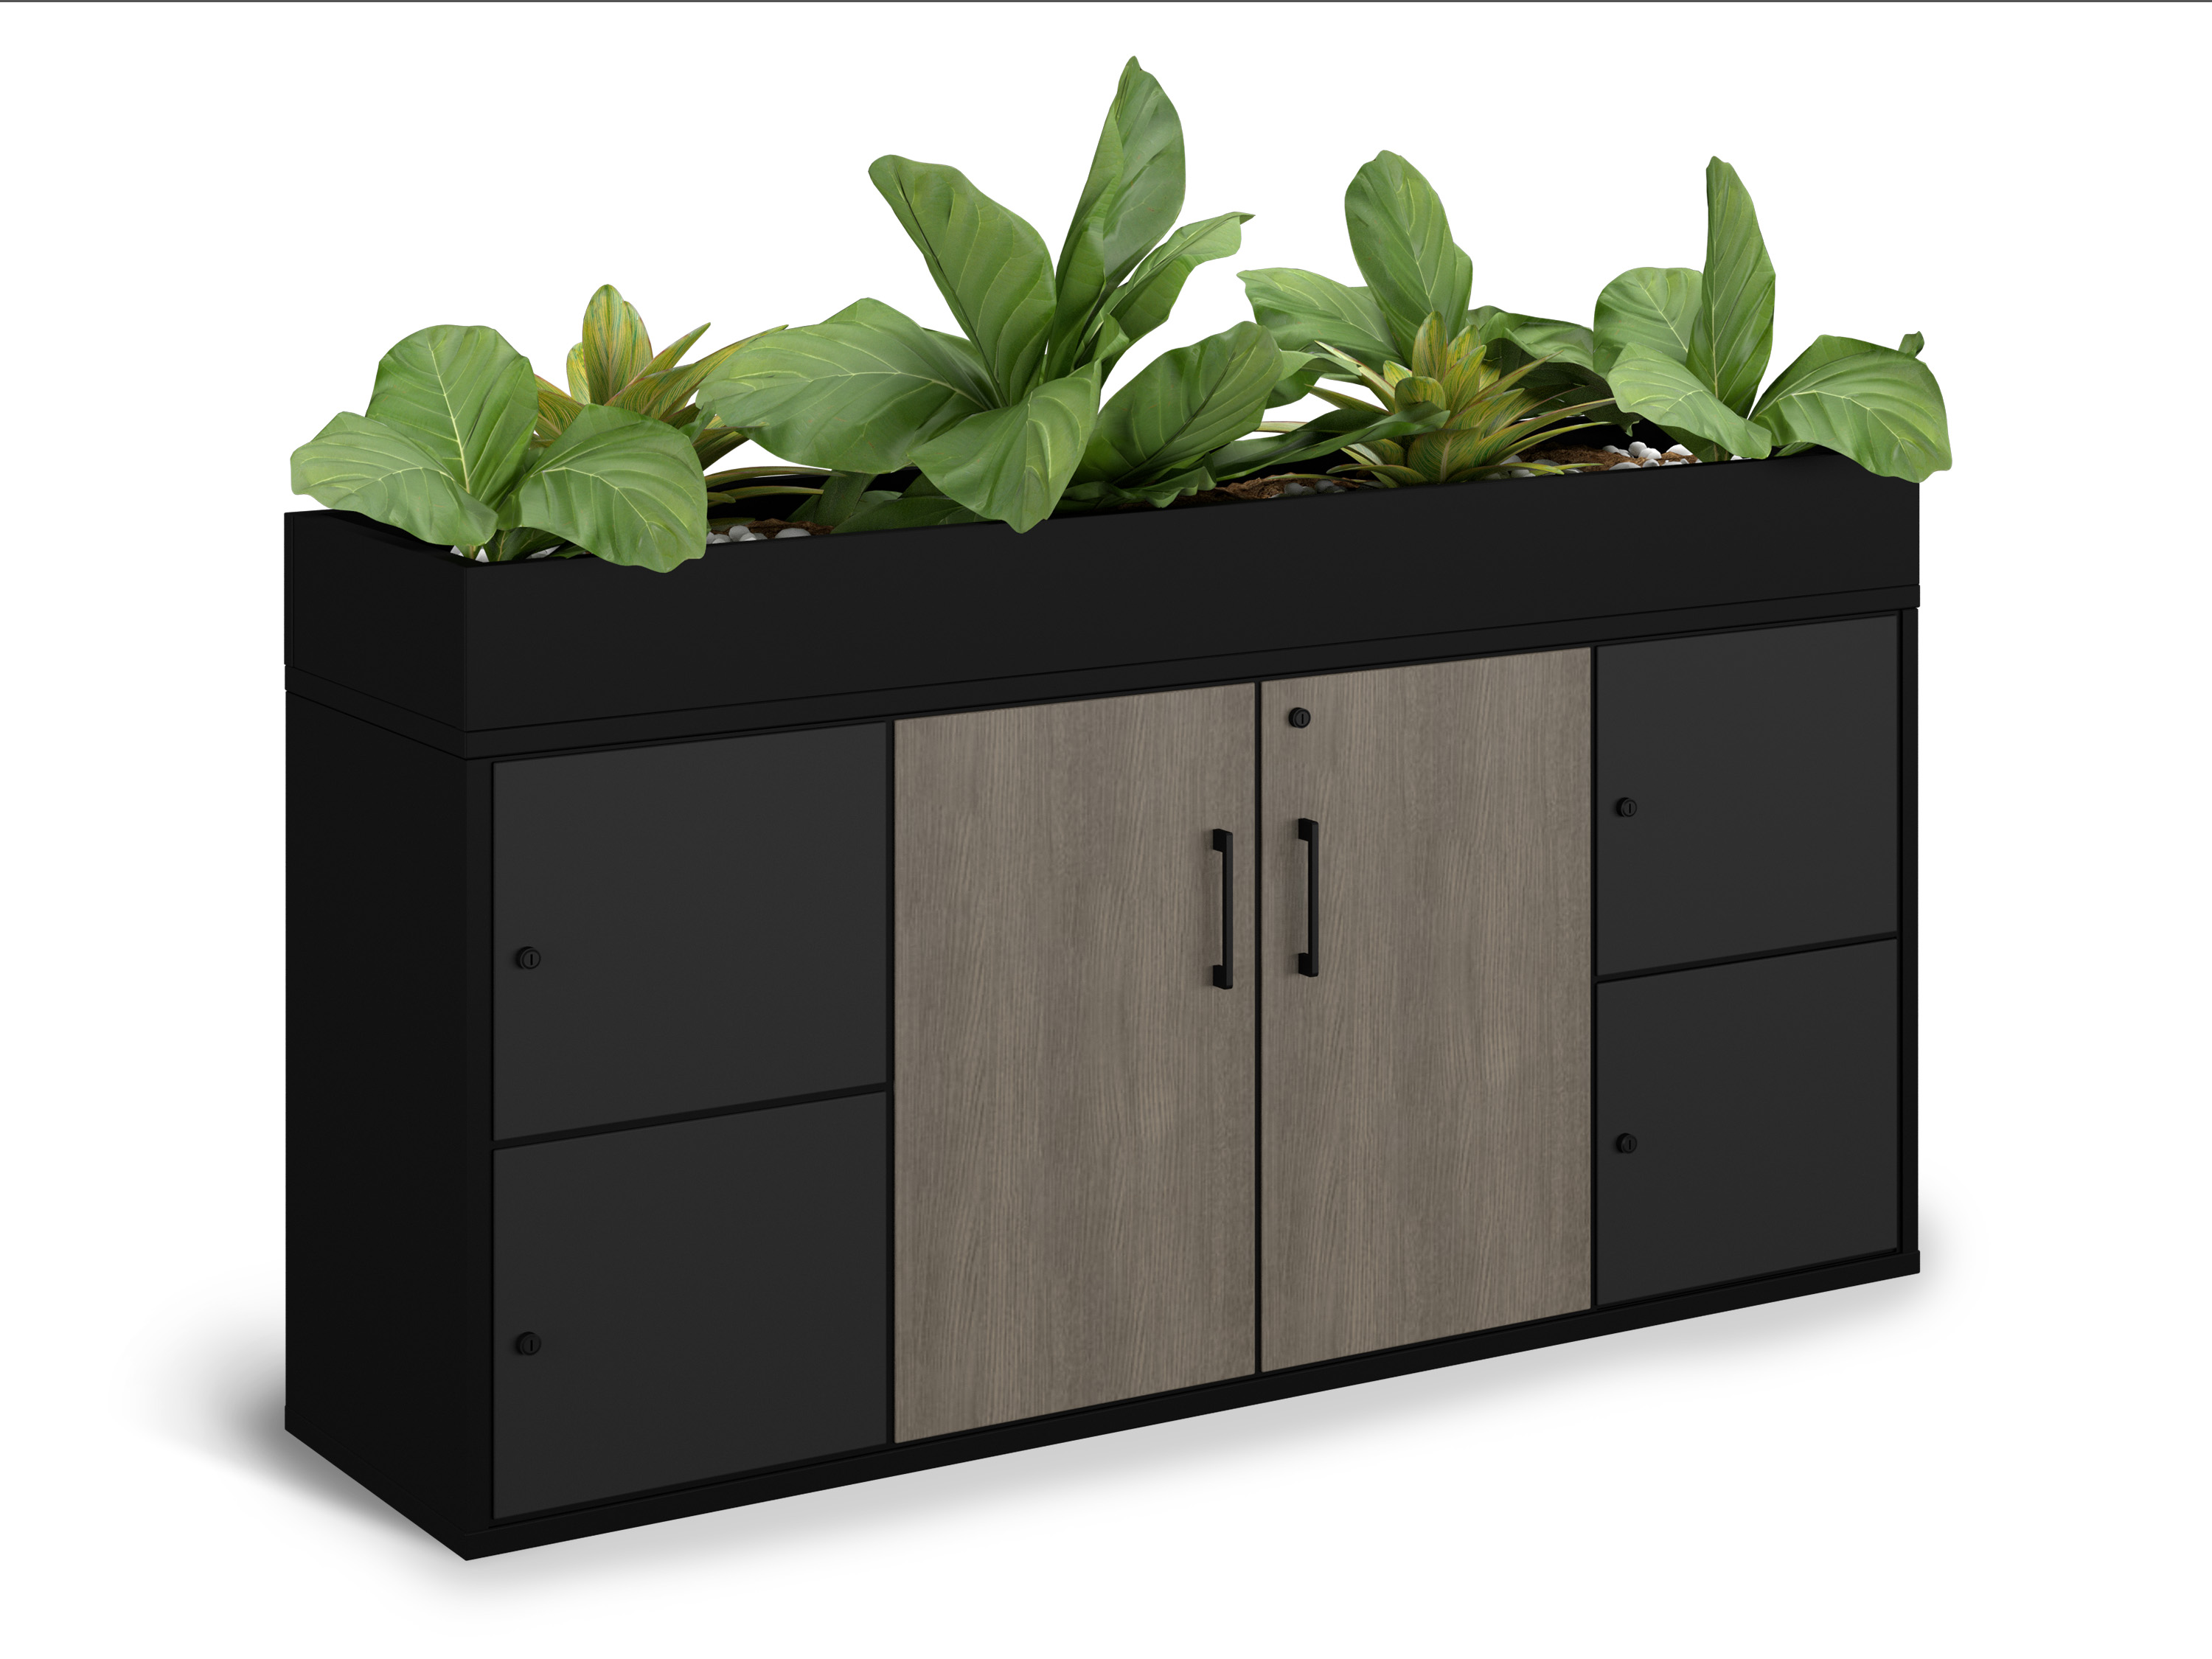 WS - End of Desk - Cupboard-Lockers with planter (Anthracite, GNO)